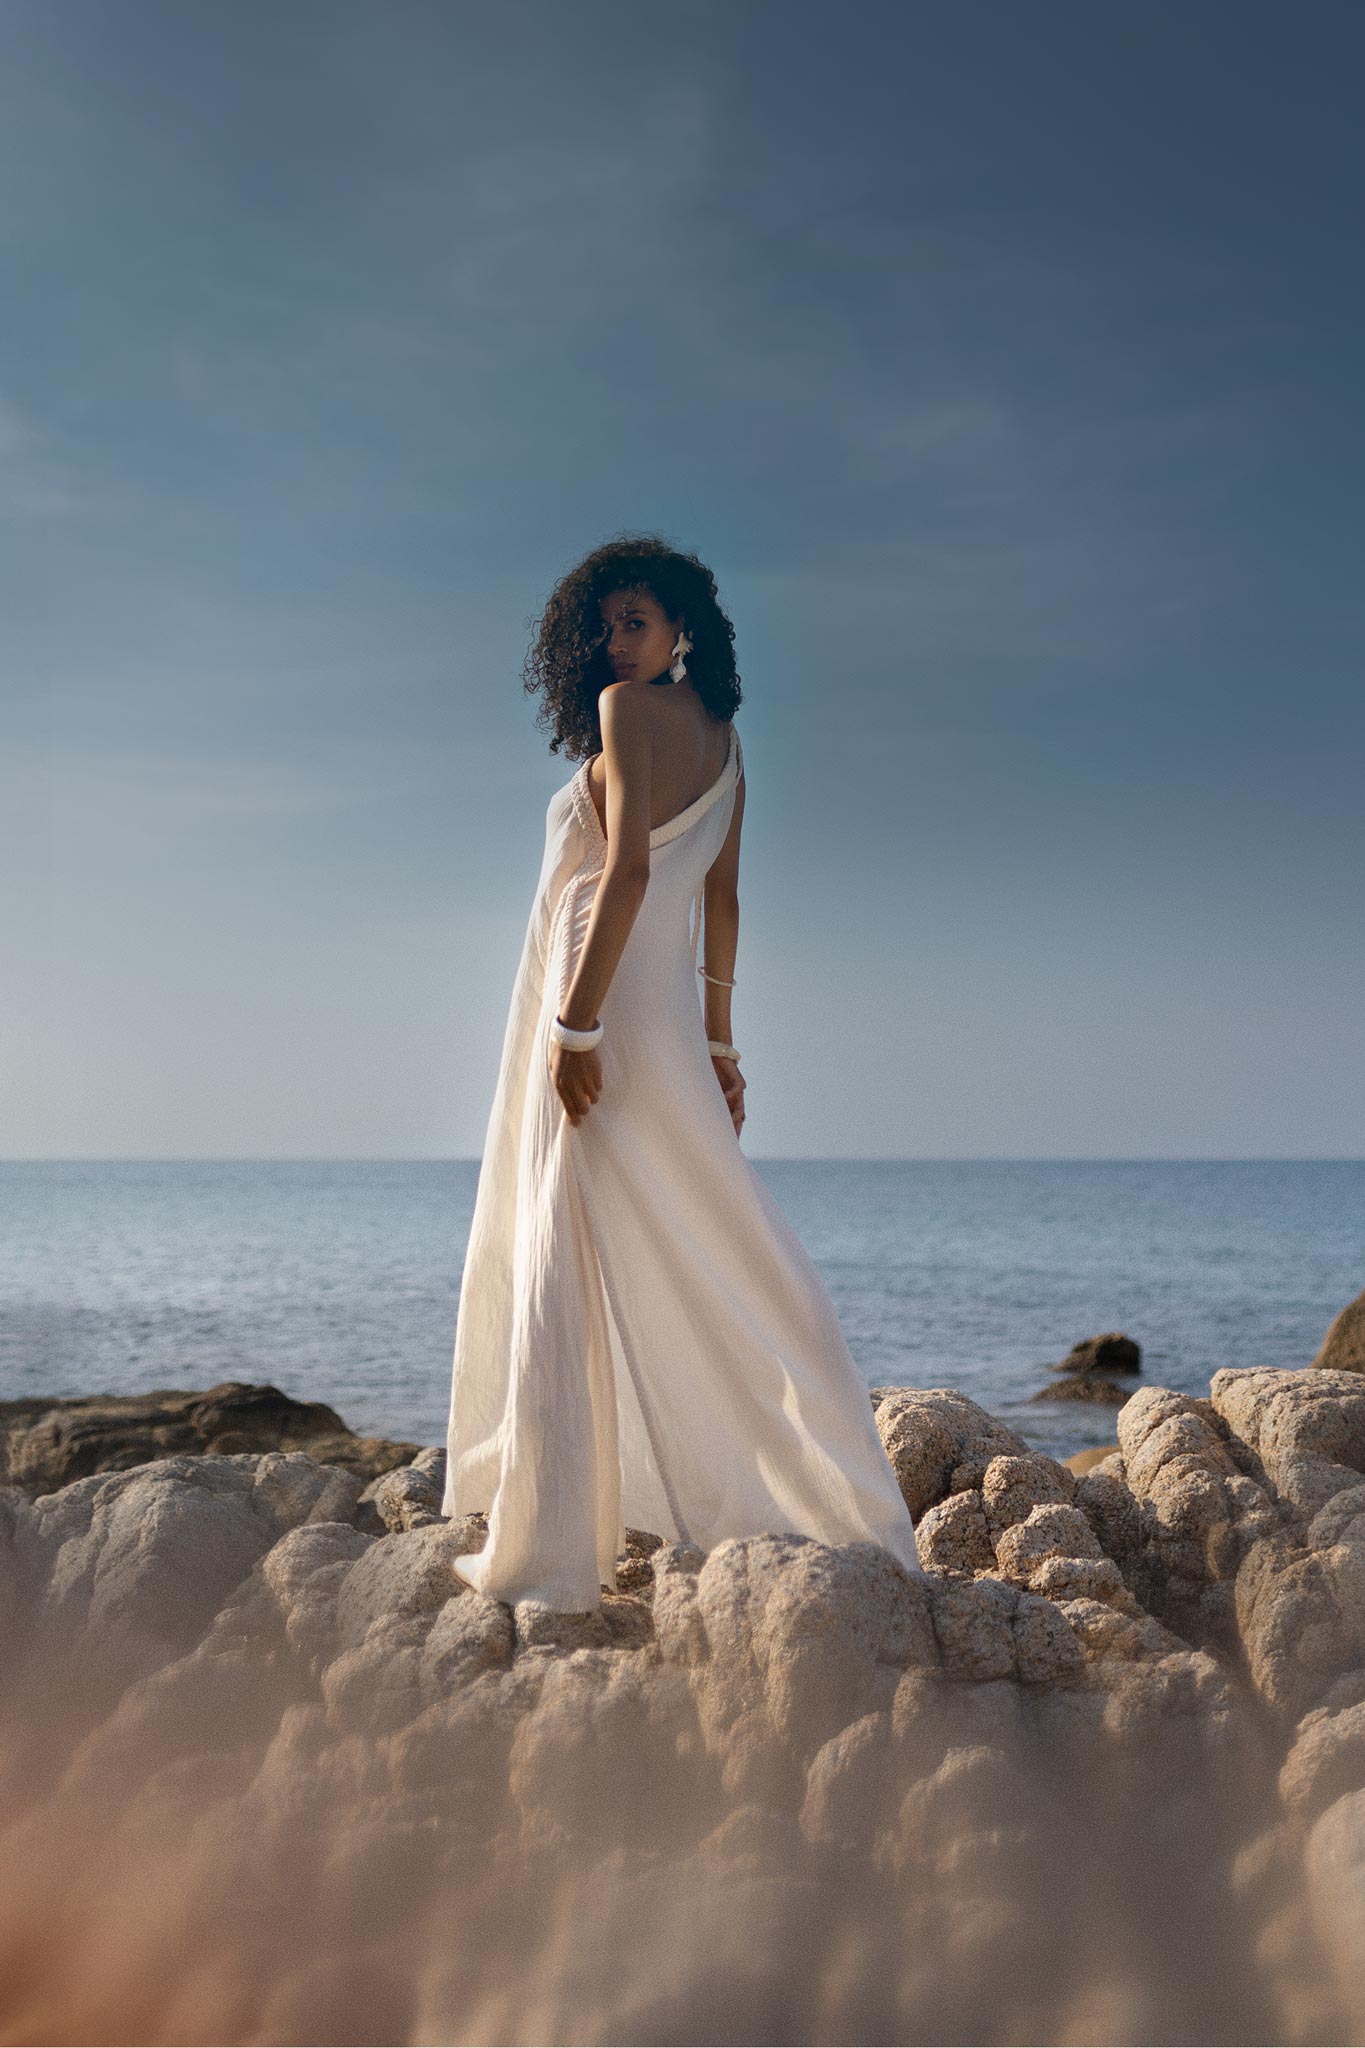 The Aurora Greek Goddess Dress: Channel timeless elegance in our iconic Aurora dress. Luxuriously crafted from organic cotton, its Grecian-inspired design and flowing silhouette radiate goddess vibes.